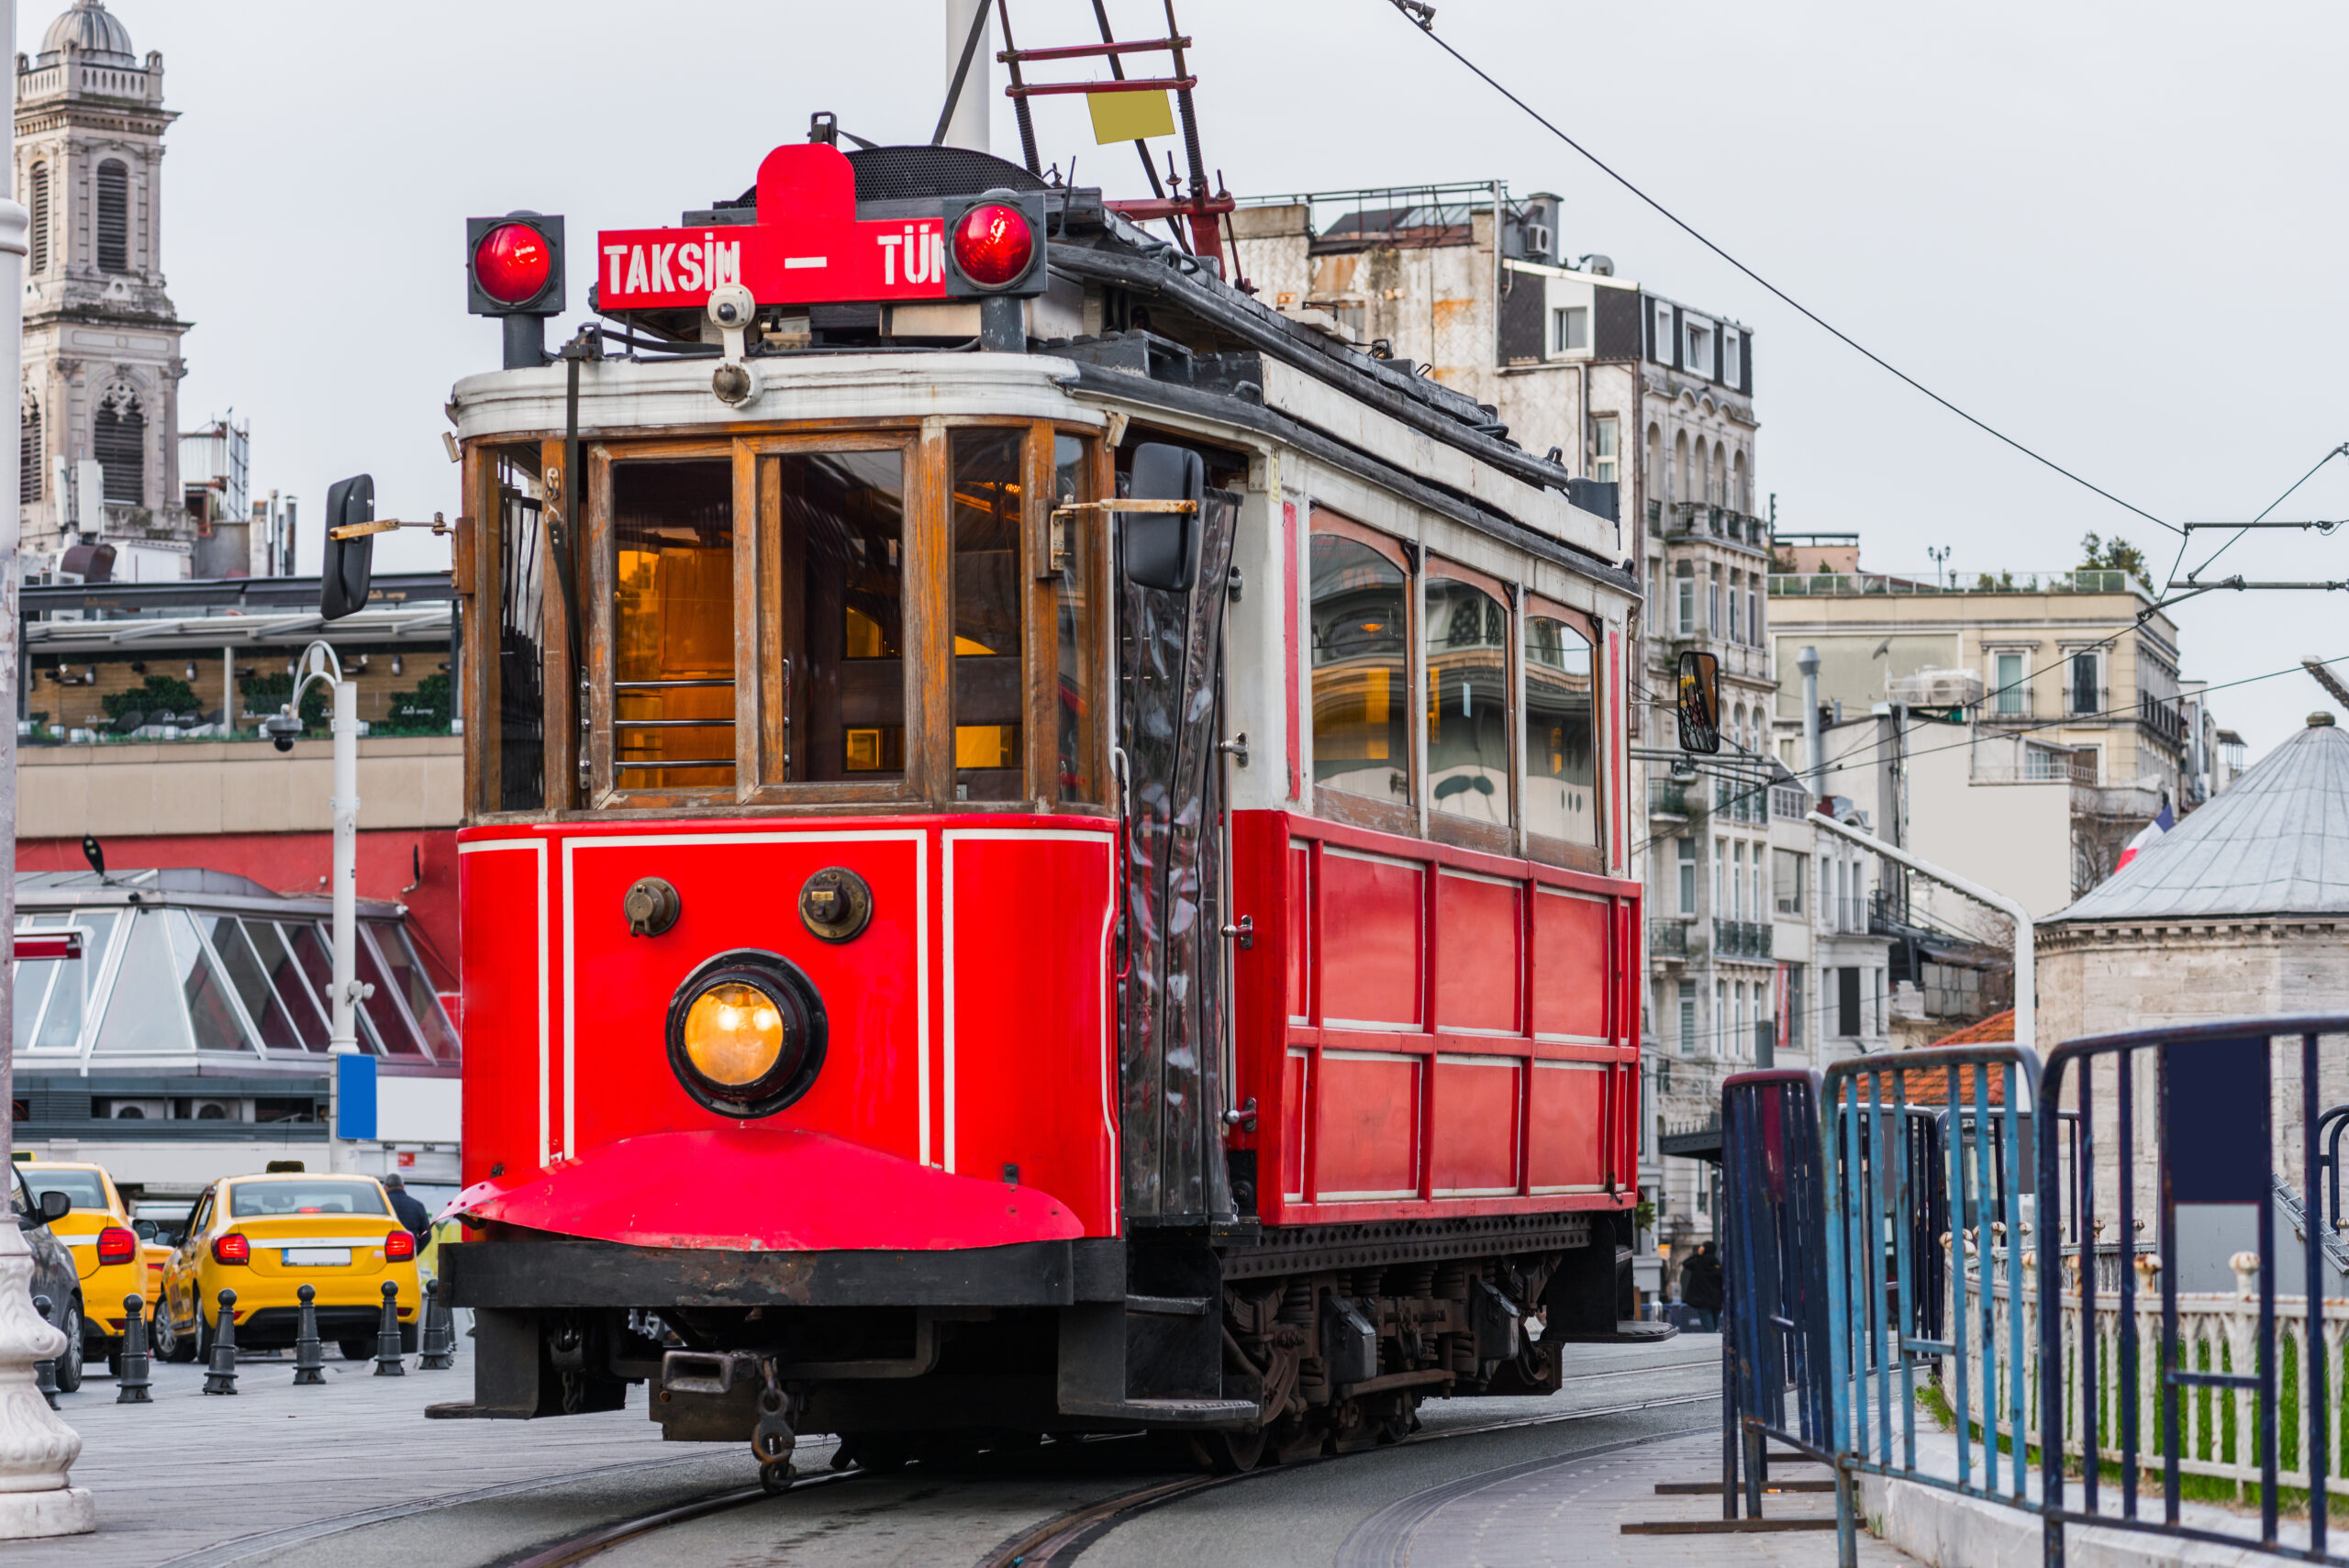 production-services-and-filming-in-turkey-traditional-red-tram